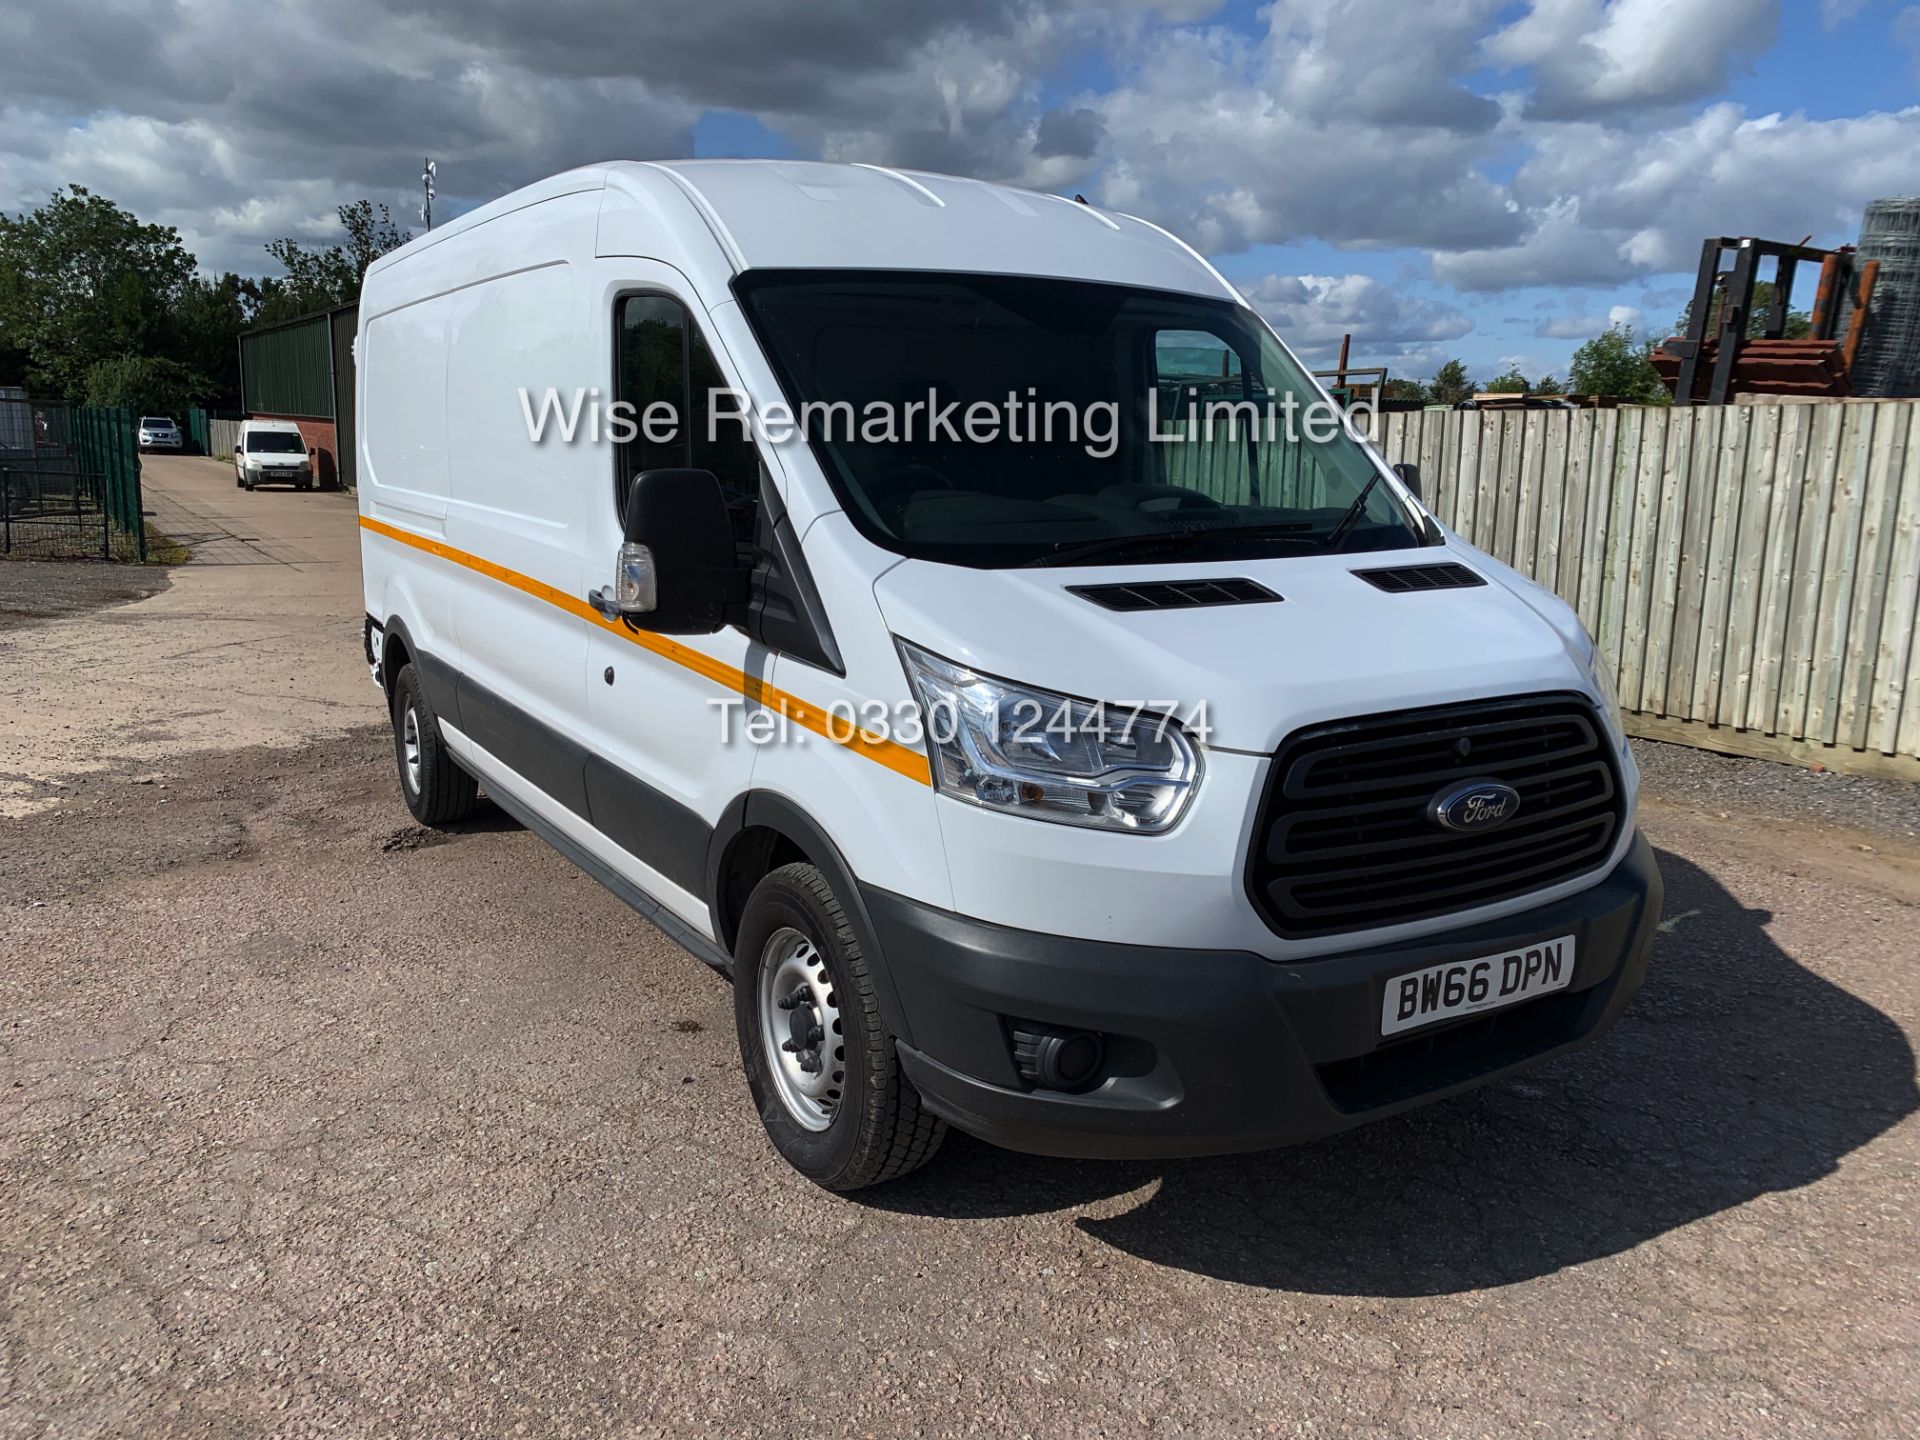 FORD TRANSIT 350 L3 2.2 TDCi 125PS (2017 MODEL) 1 KEEPER FROM NEW - Image 2 of 16